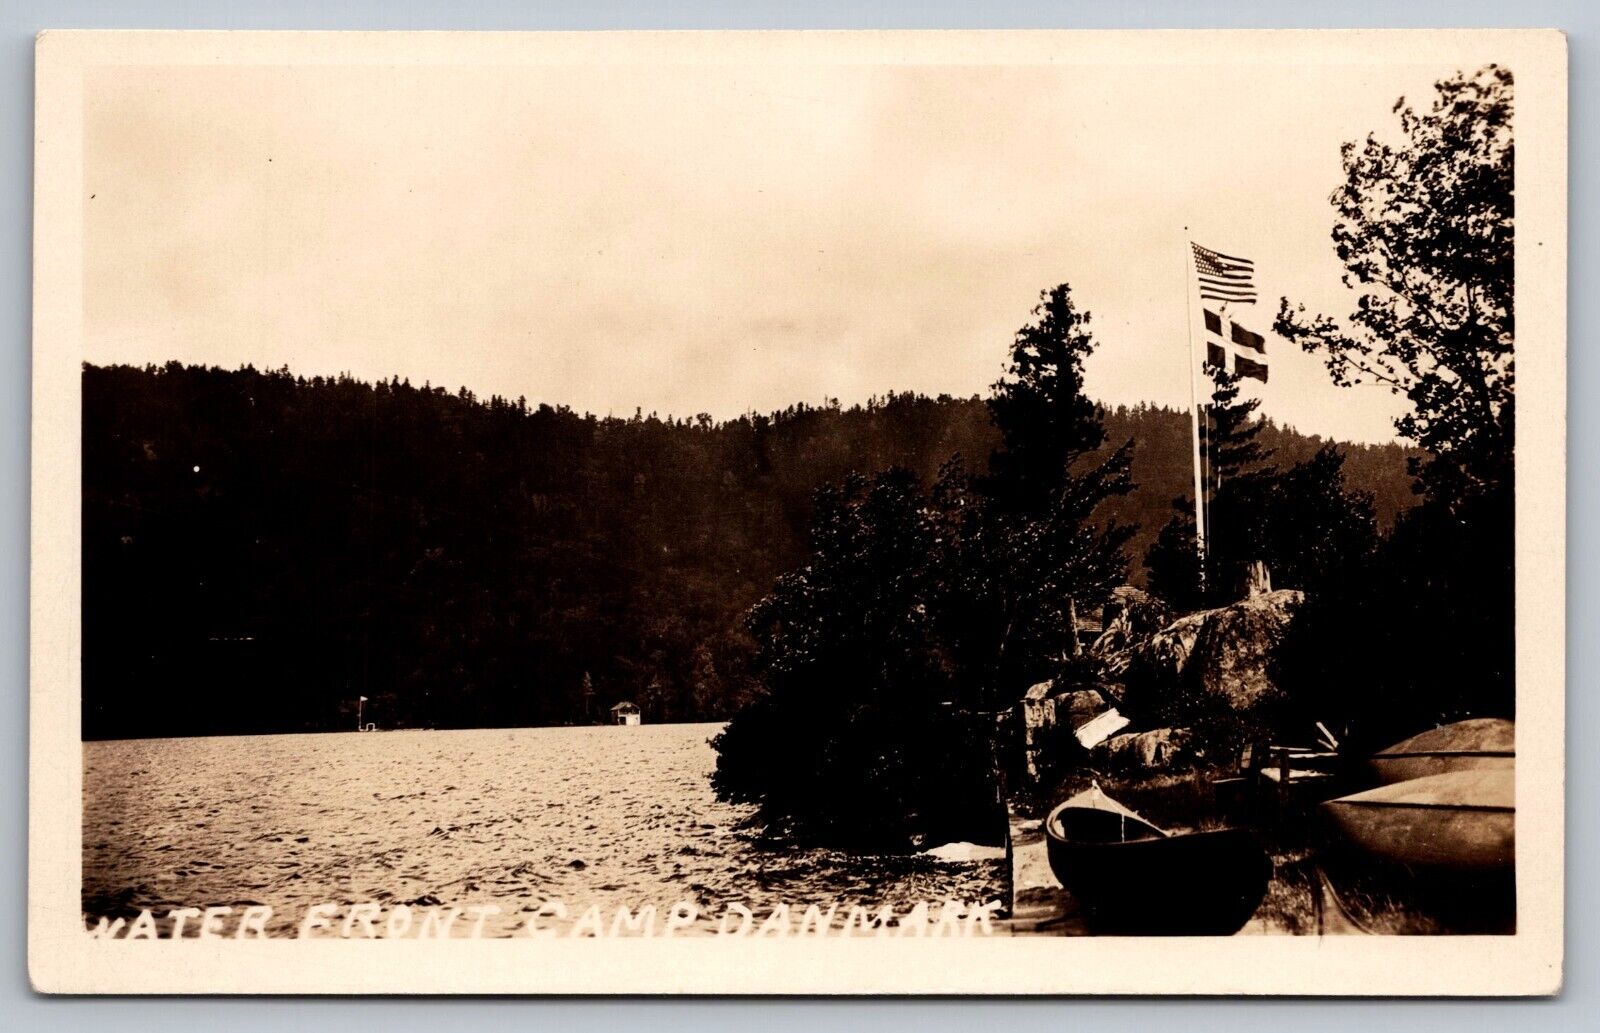 Water Front Camp Danmark-Old Forge New York-VTG RPPC Photo Postcard-Adirondack